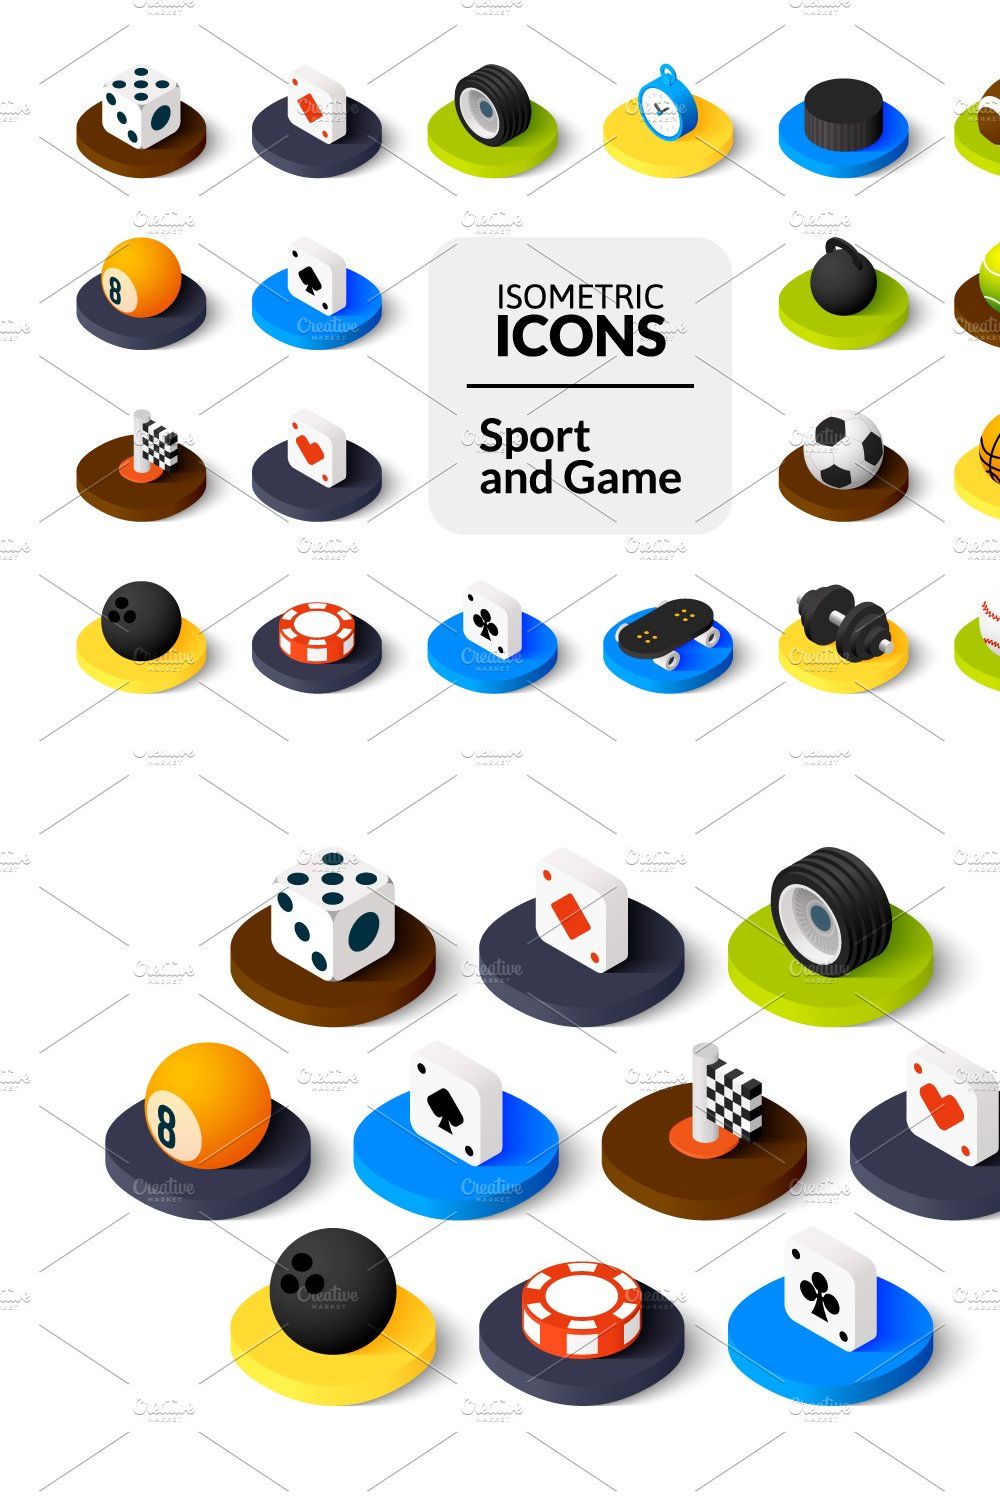 Isometric icons - Sport and Game pinterest preview image.